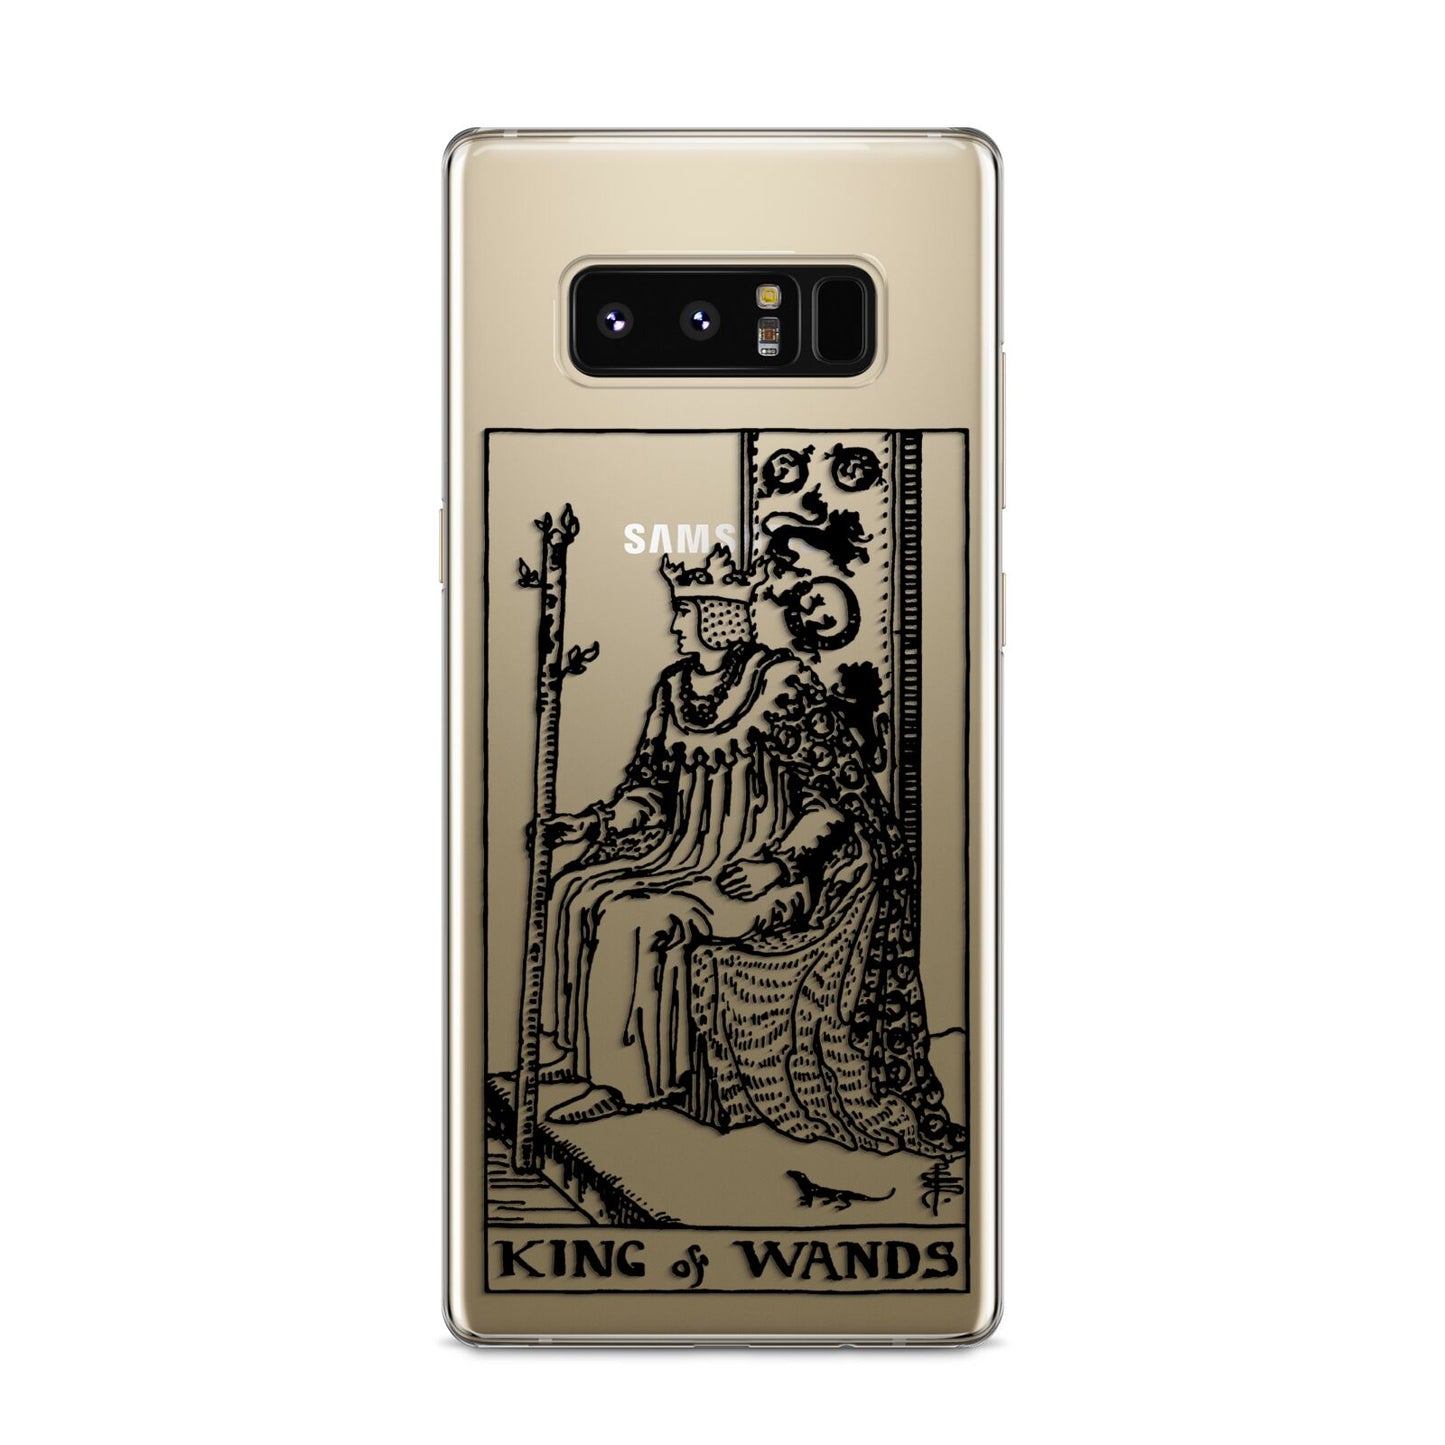 King of Wands Monochrome Samsung Galaxy S8 Case